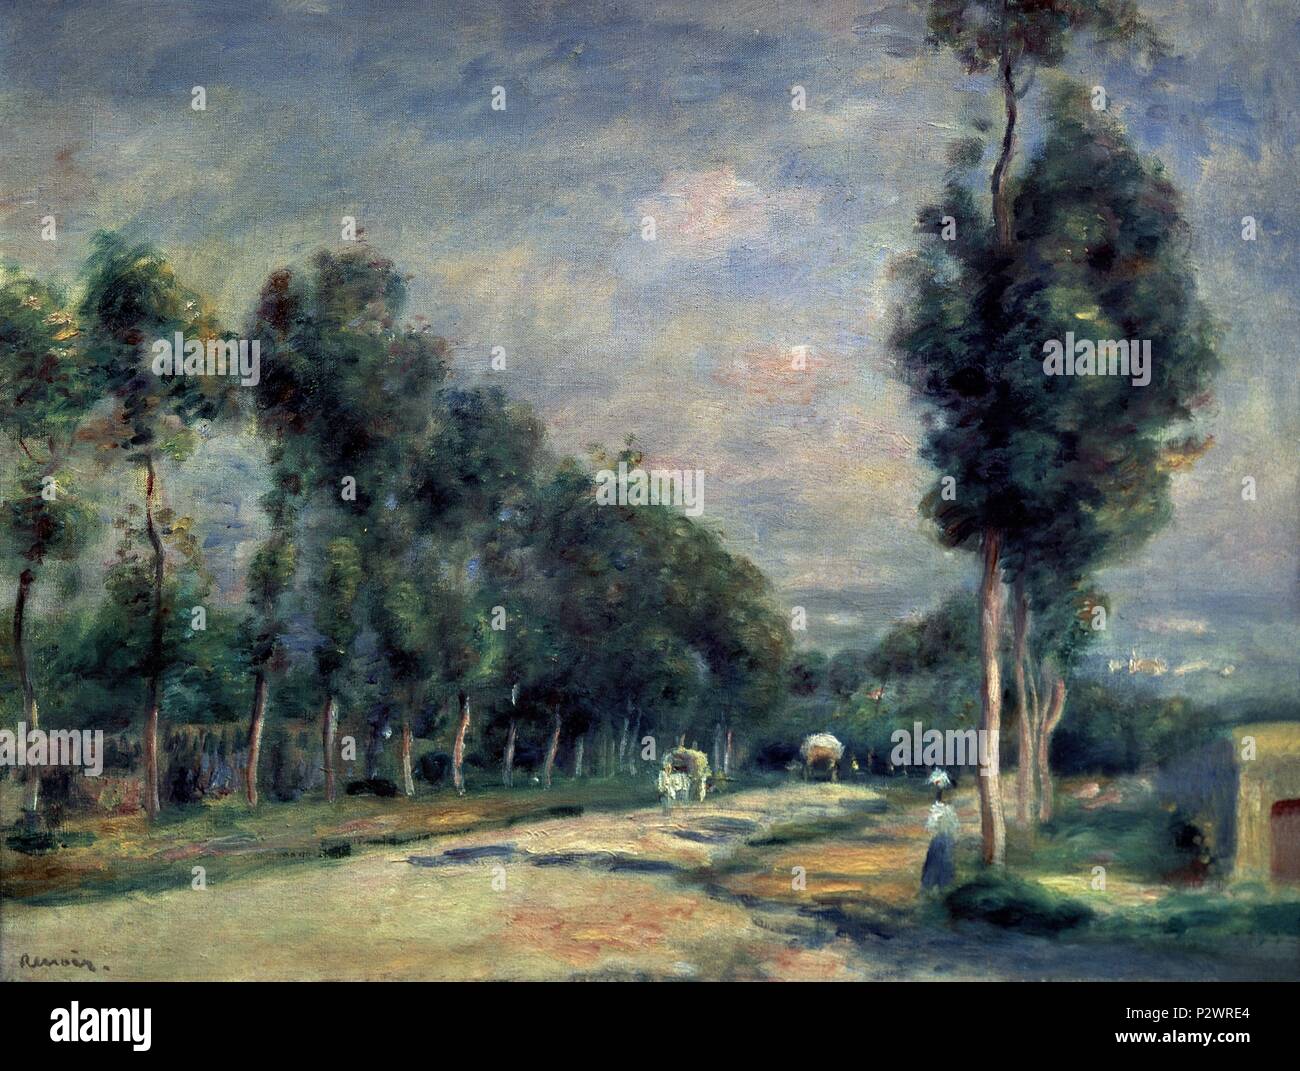 The Road to Versailles at Louveciennes - oil on canvas. Author: Pierre Auguste Renoir (1841-1919). Location: MUSEO, LILLE, FRANCE. Also known as: CARRETERA DE VERSALLES. Stock Photo